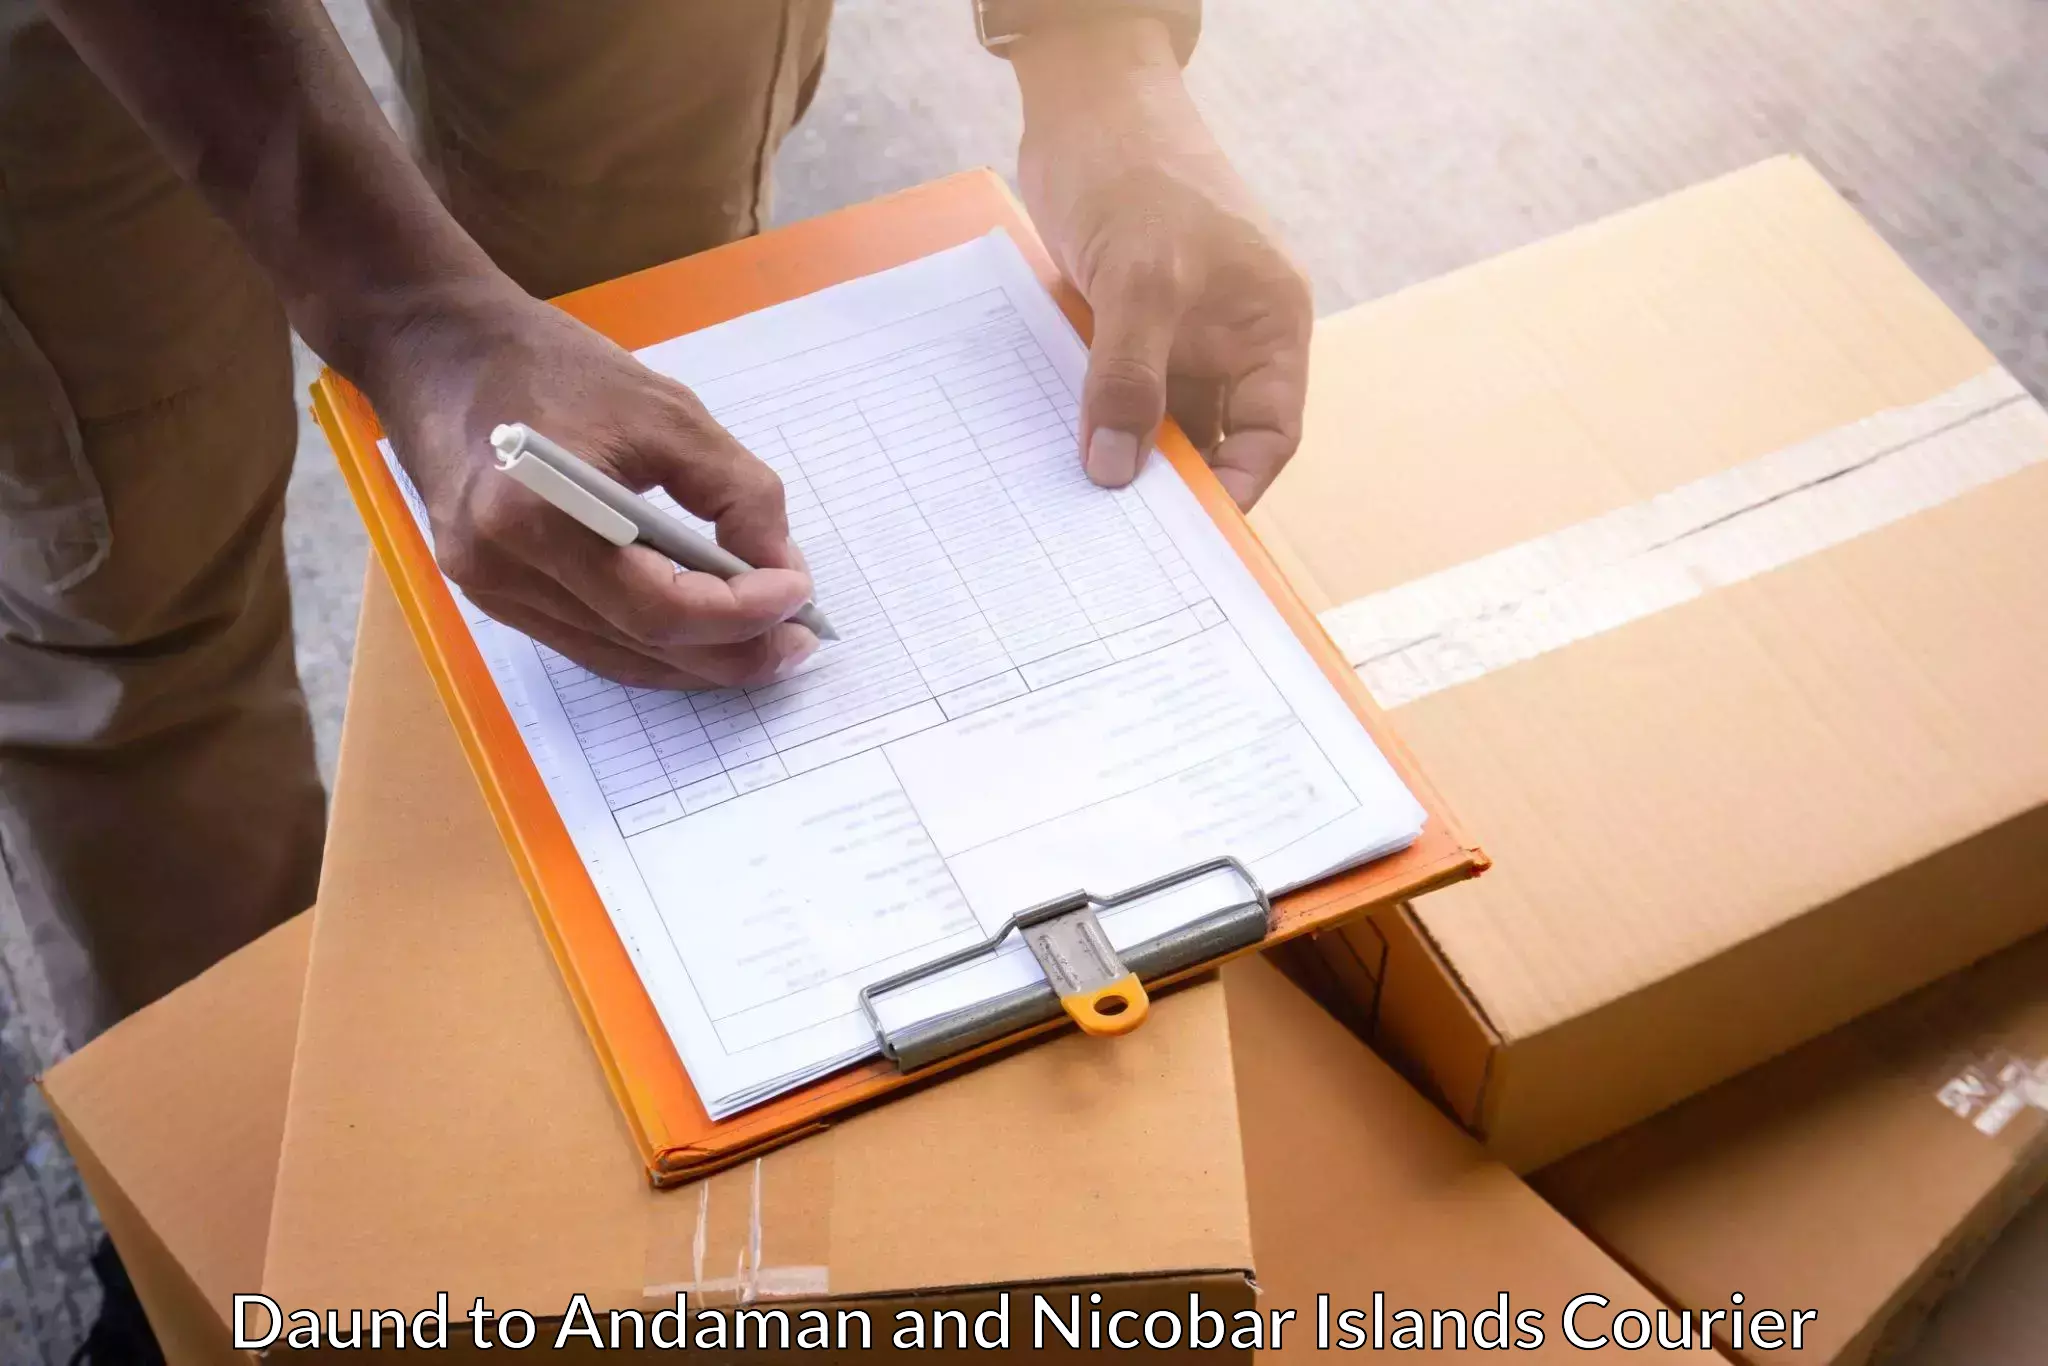 Fast parcel dispatch in Daund to Andaman and Nicobar Islands